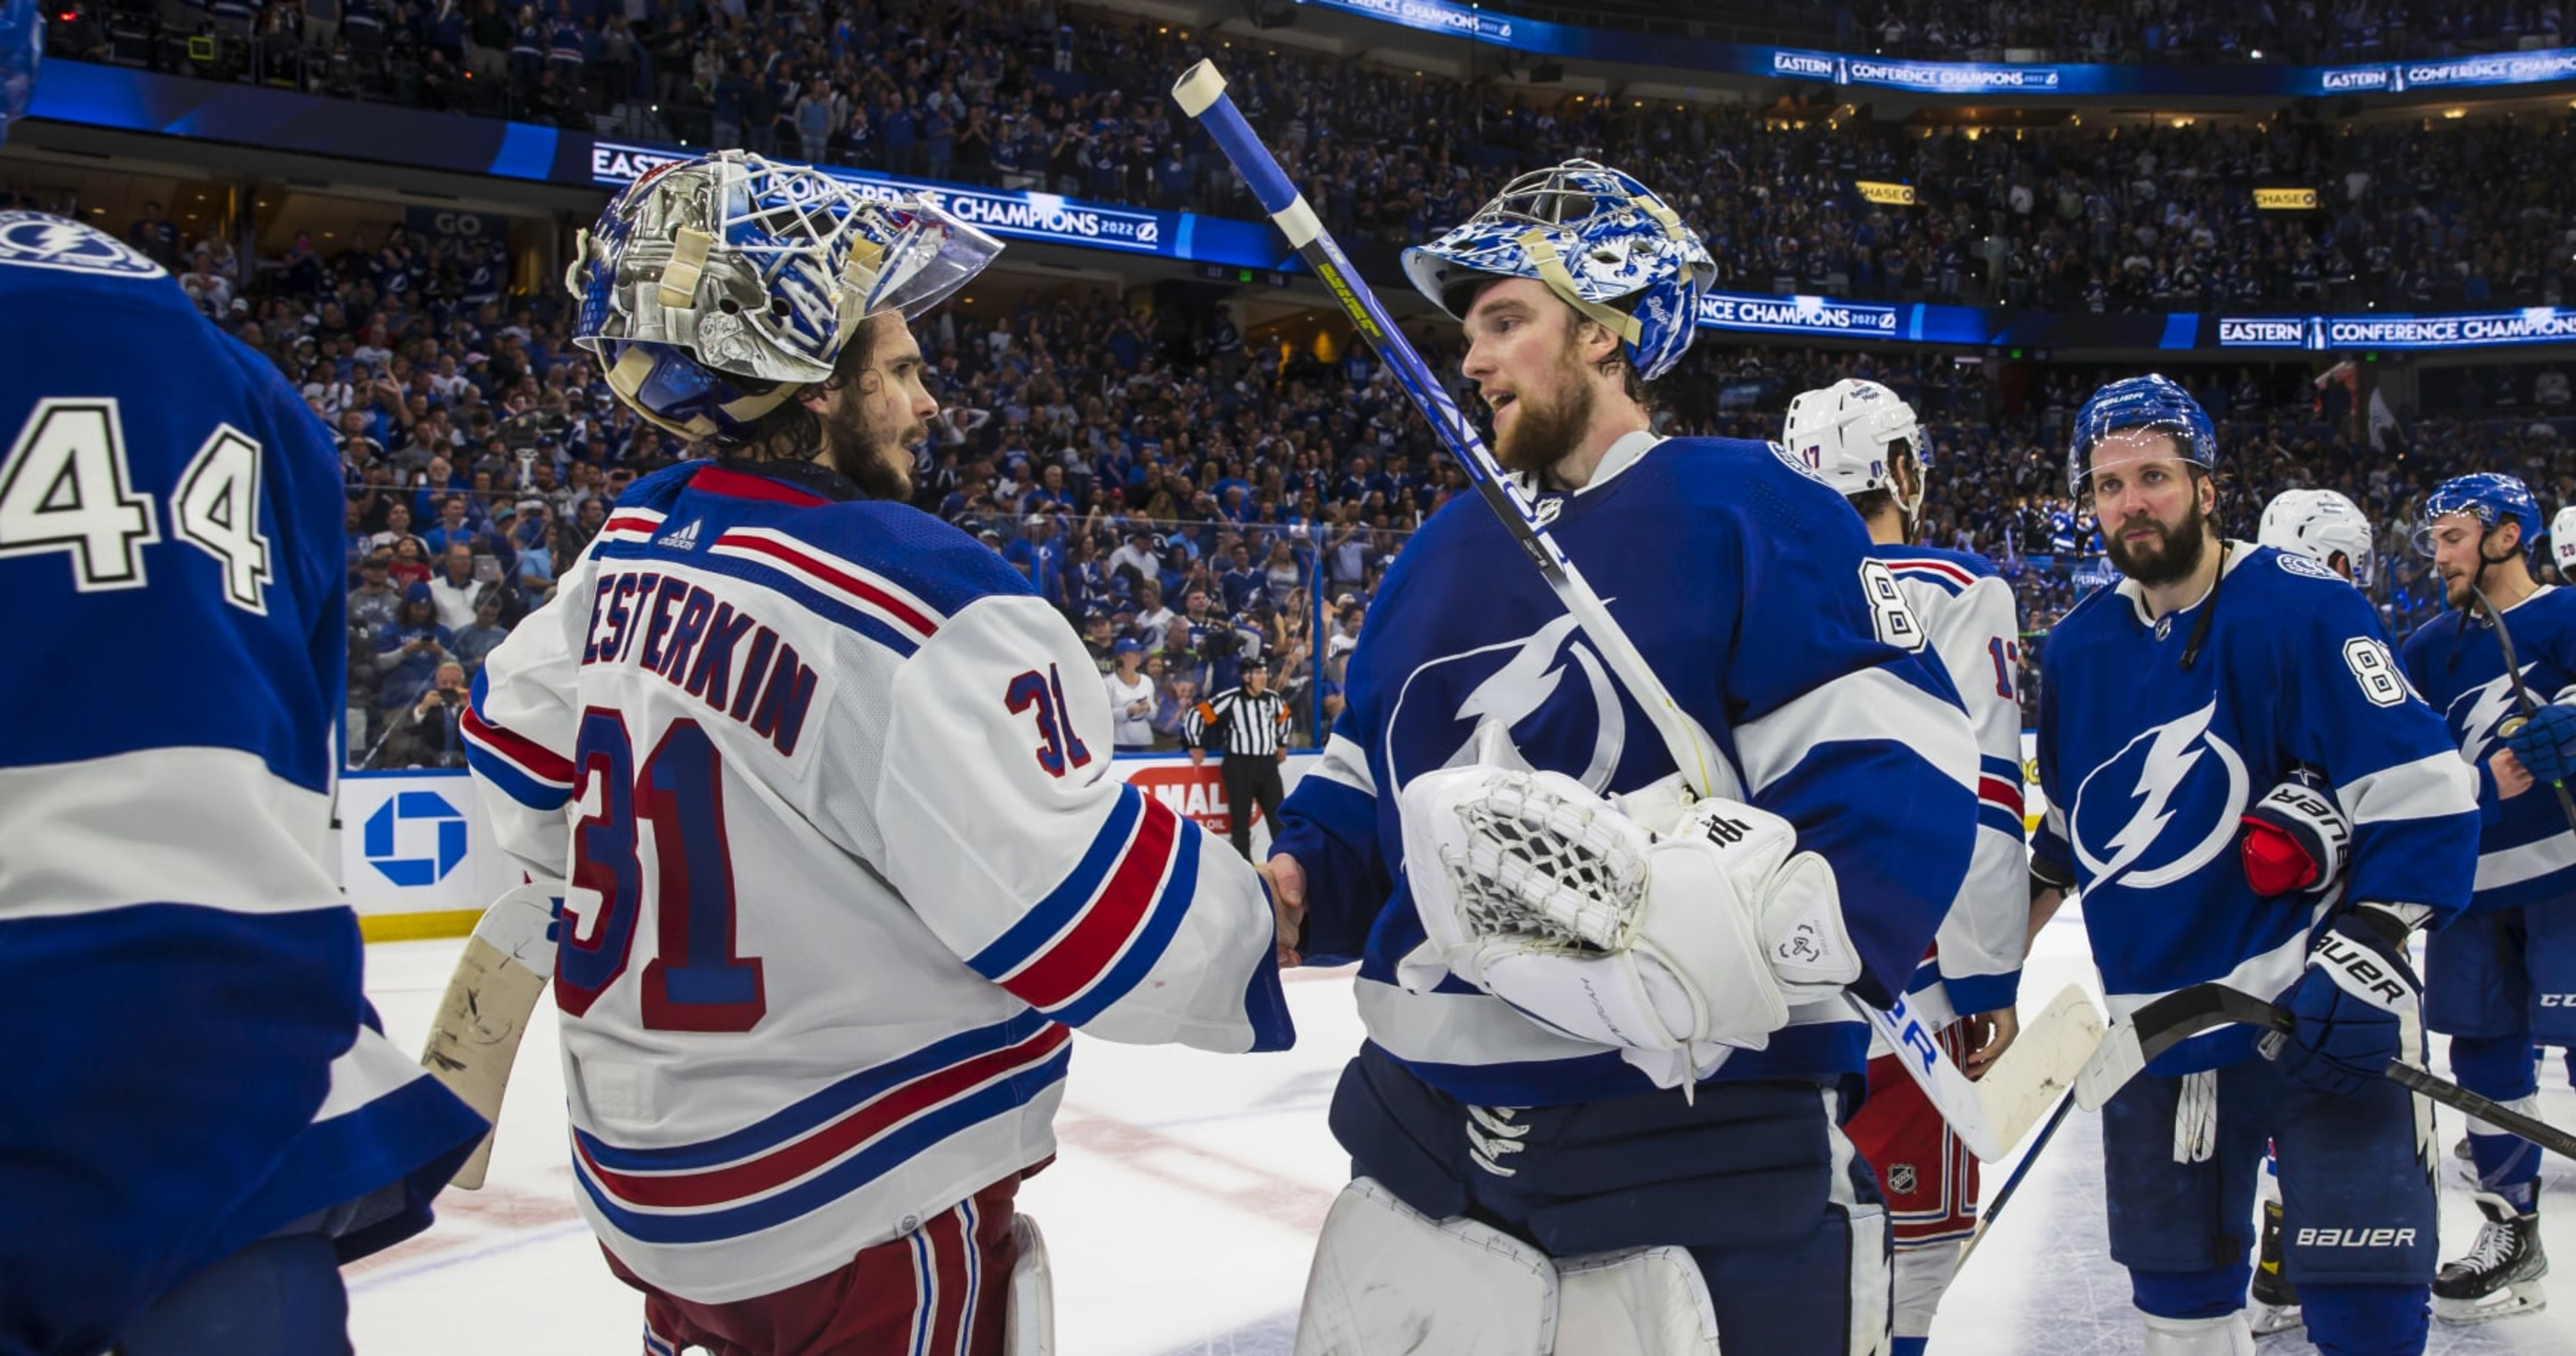 Russian goalies are thriving in the NHL — What's their secret